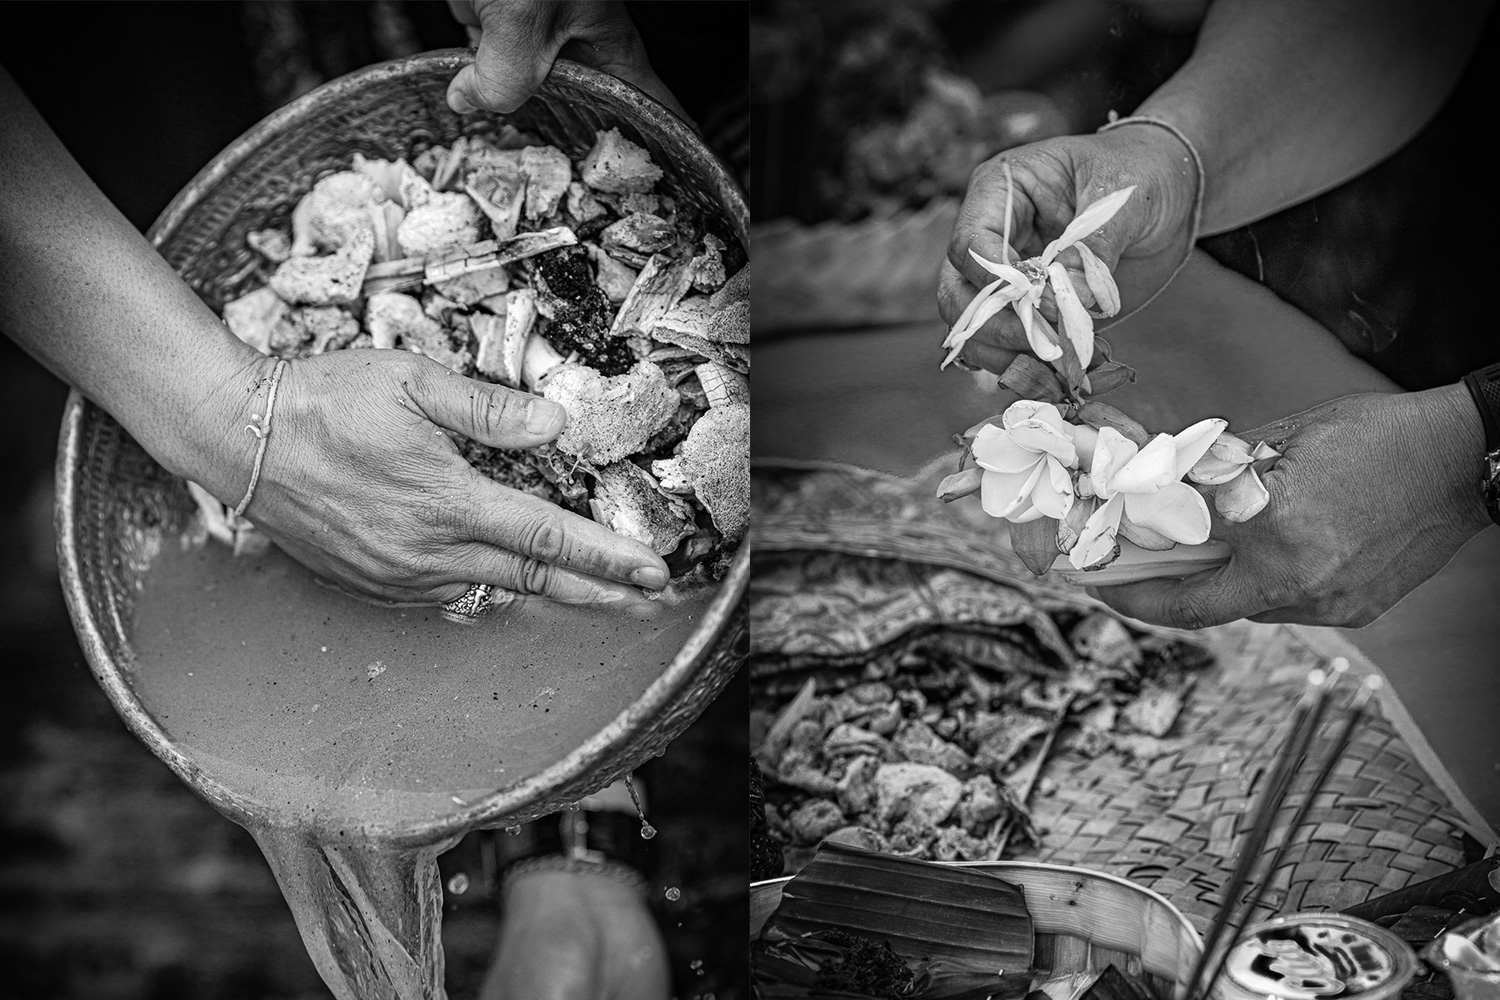 Ngaben cremation in Bali, washing the scraps of ash and bone from the cremated body